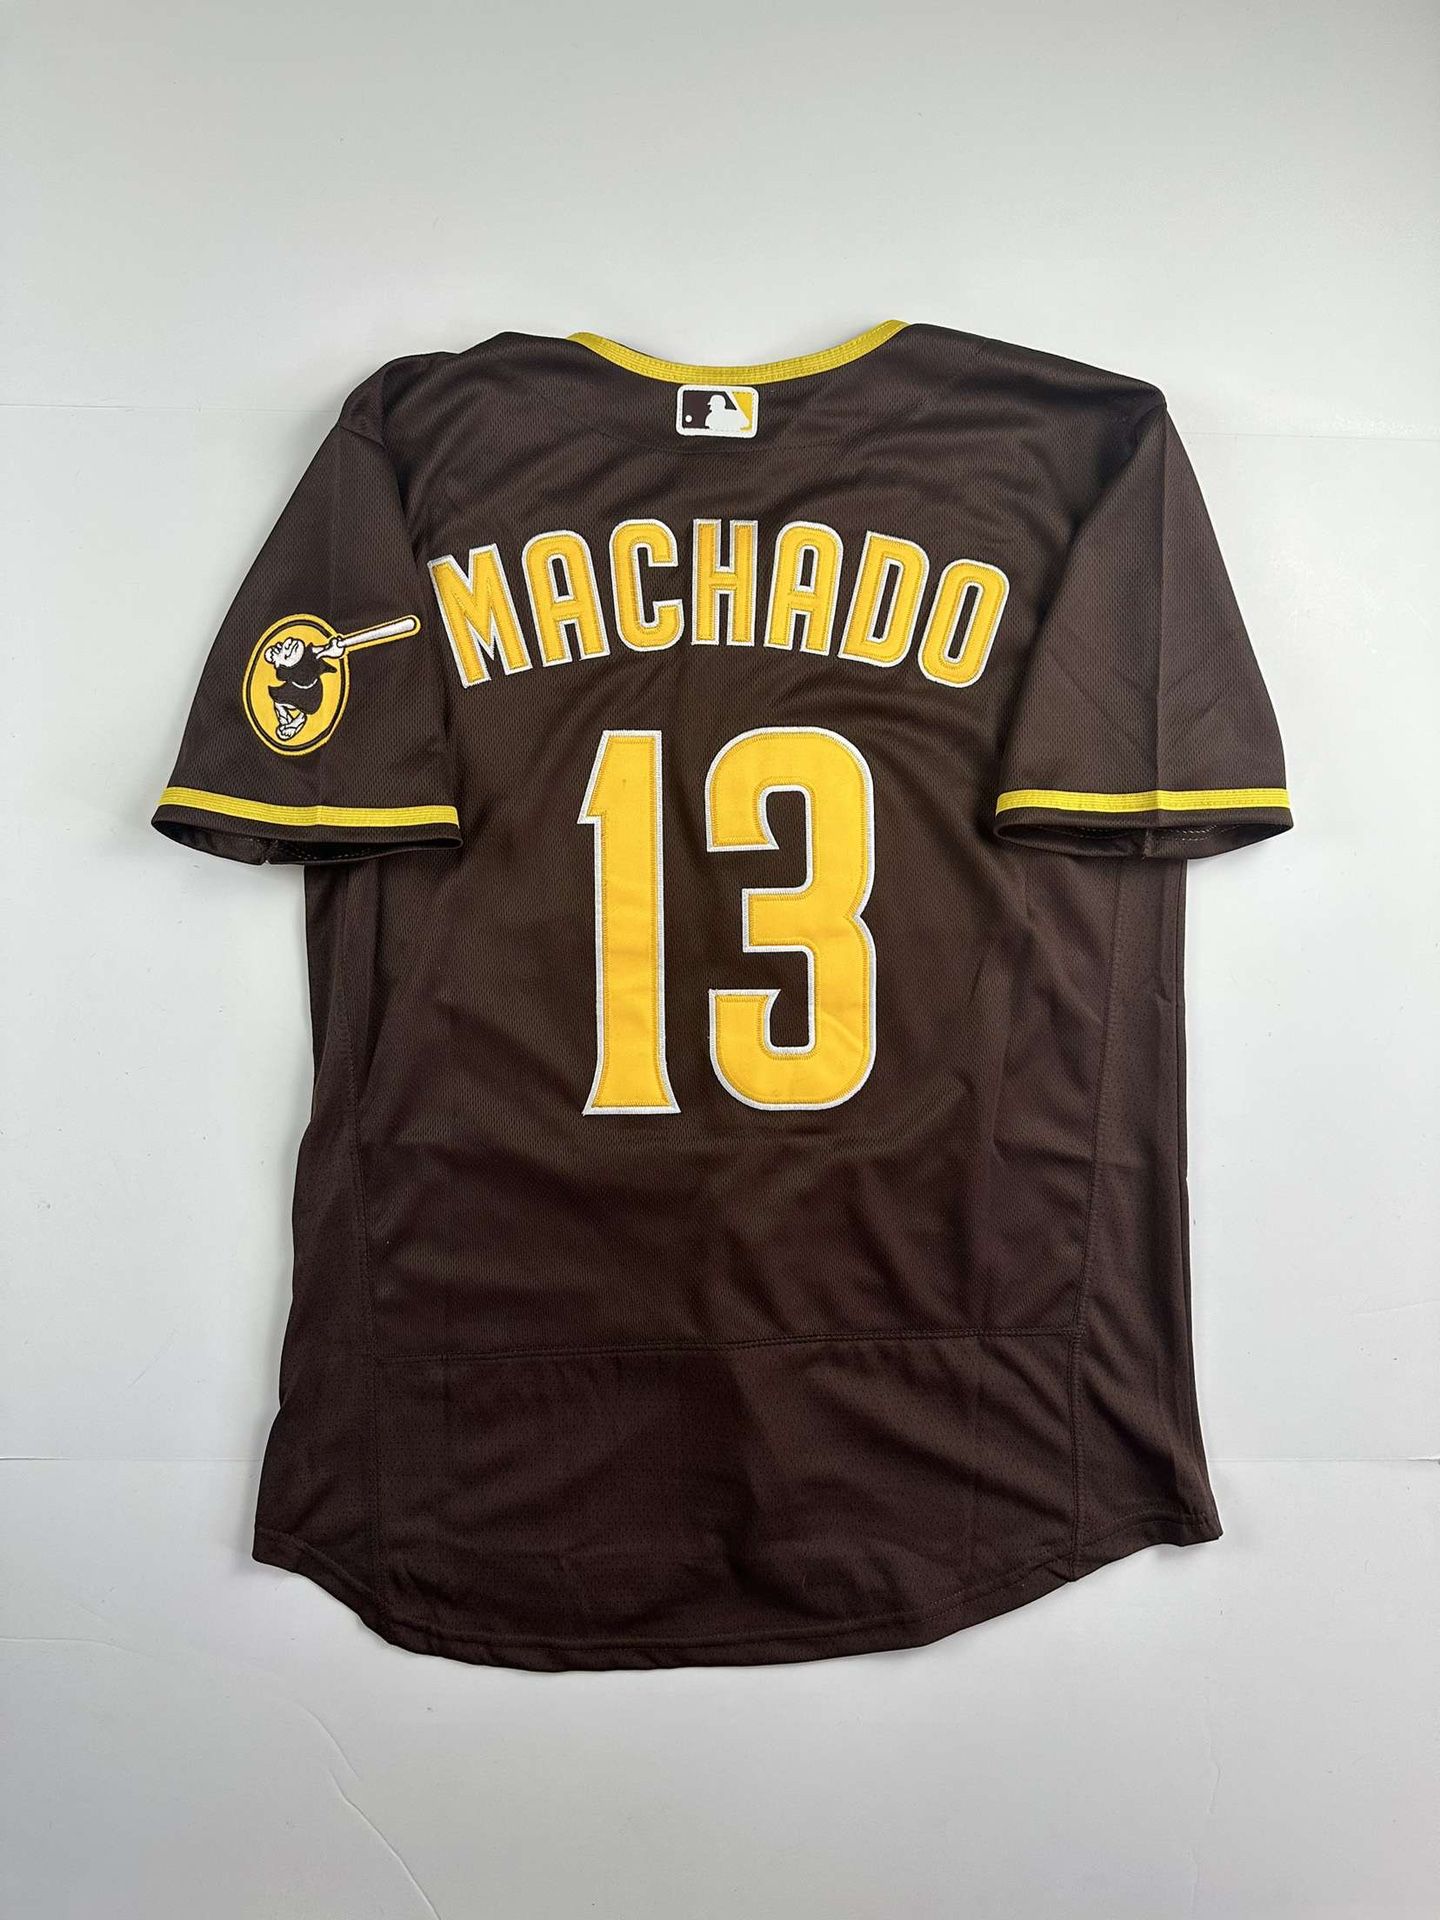 Manny Machado Jersey for Sale in Imperial Beach, CA - OfferUp